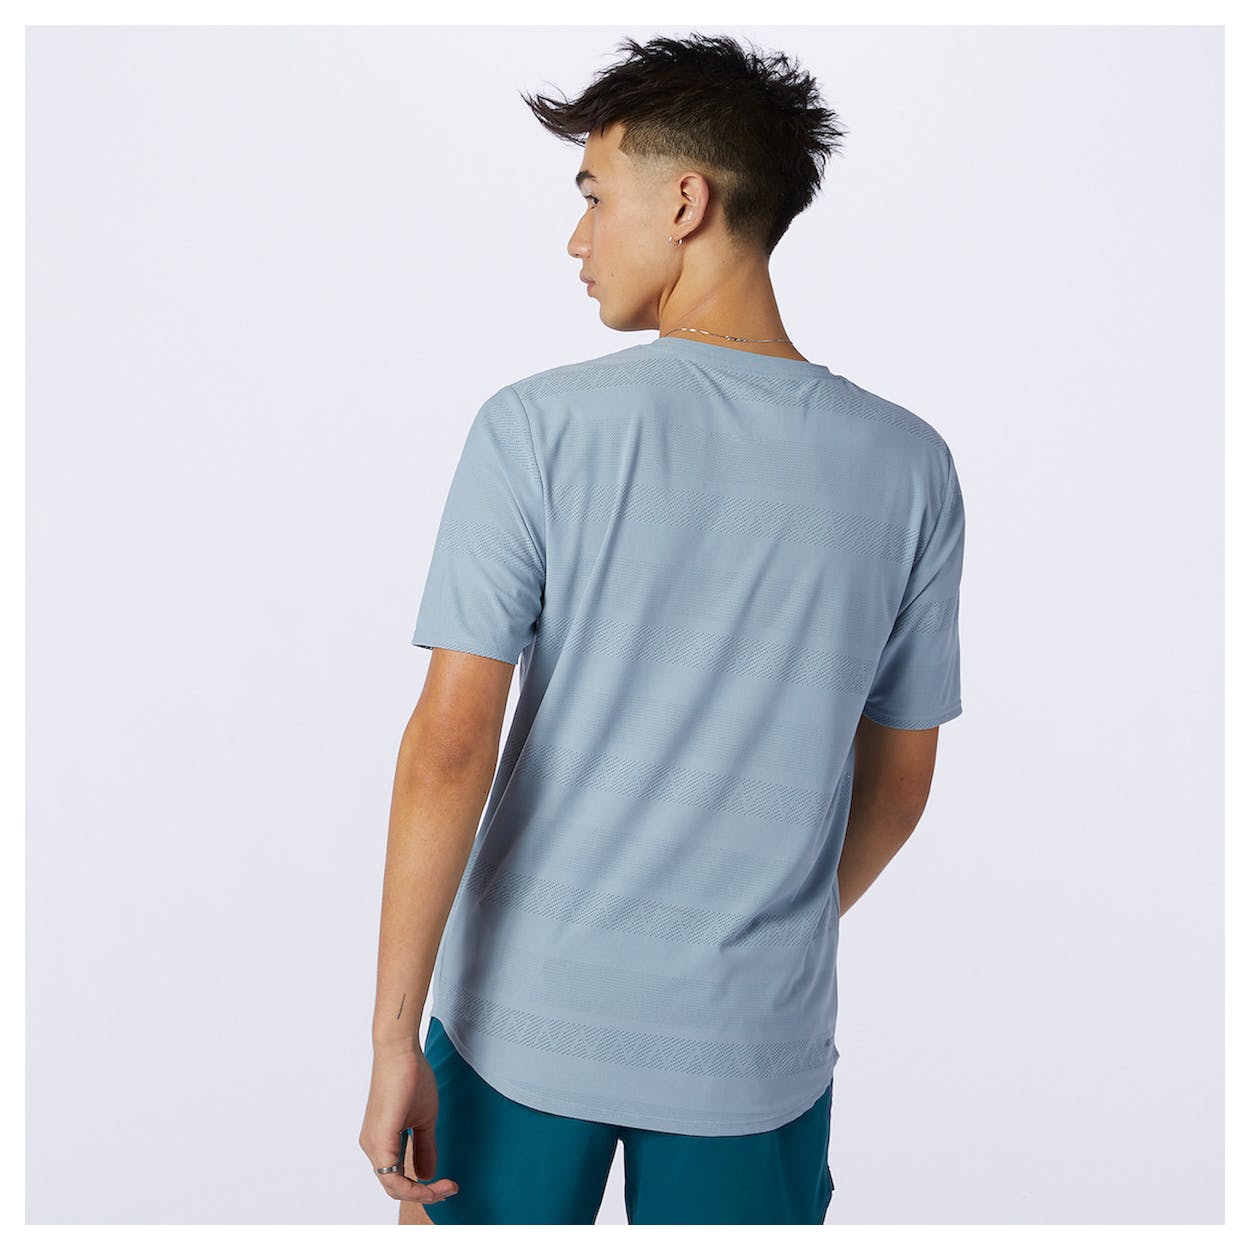 Back view of the Men's Q Speed Jacquard Short Sleeve by New Balance in the color Light Slate